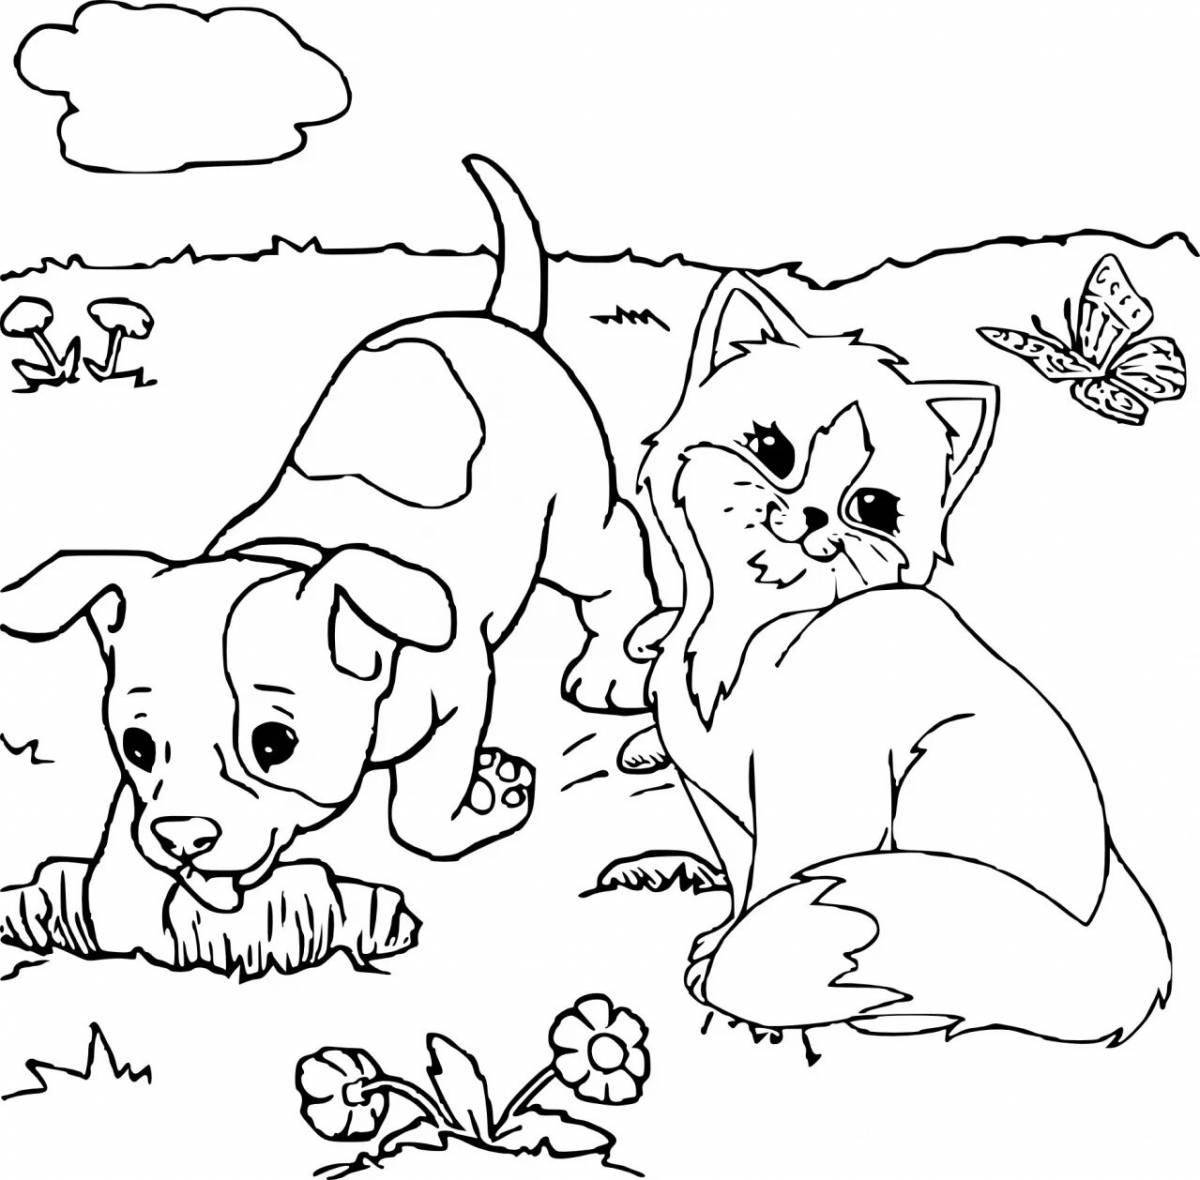 Adorable coloring book for girls dogs cats